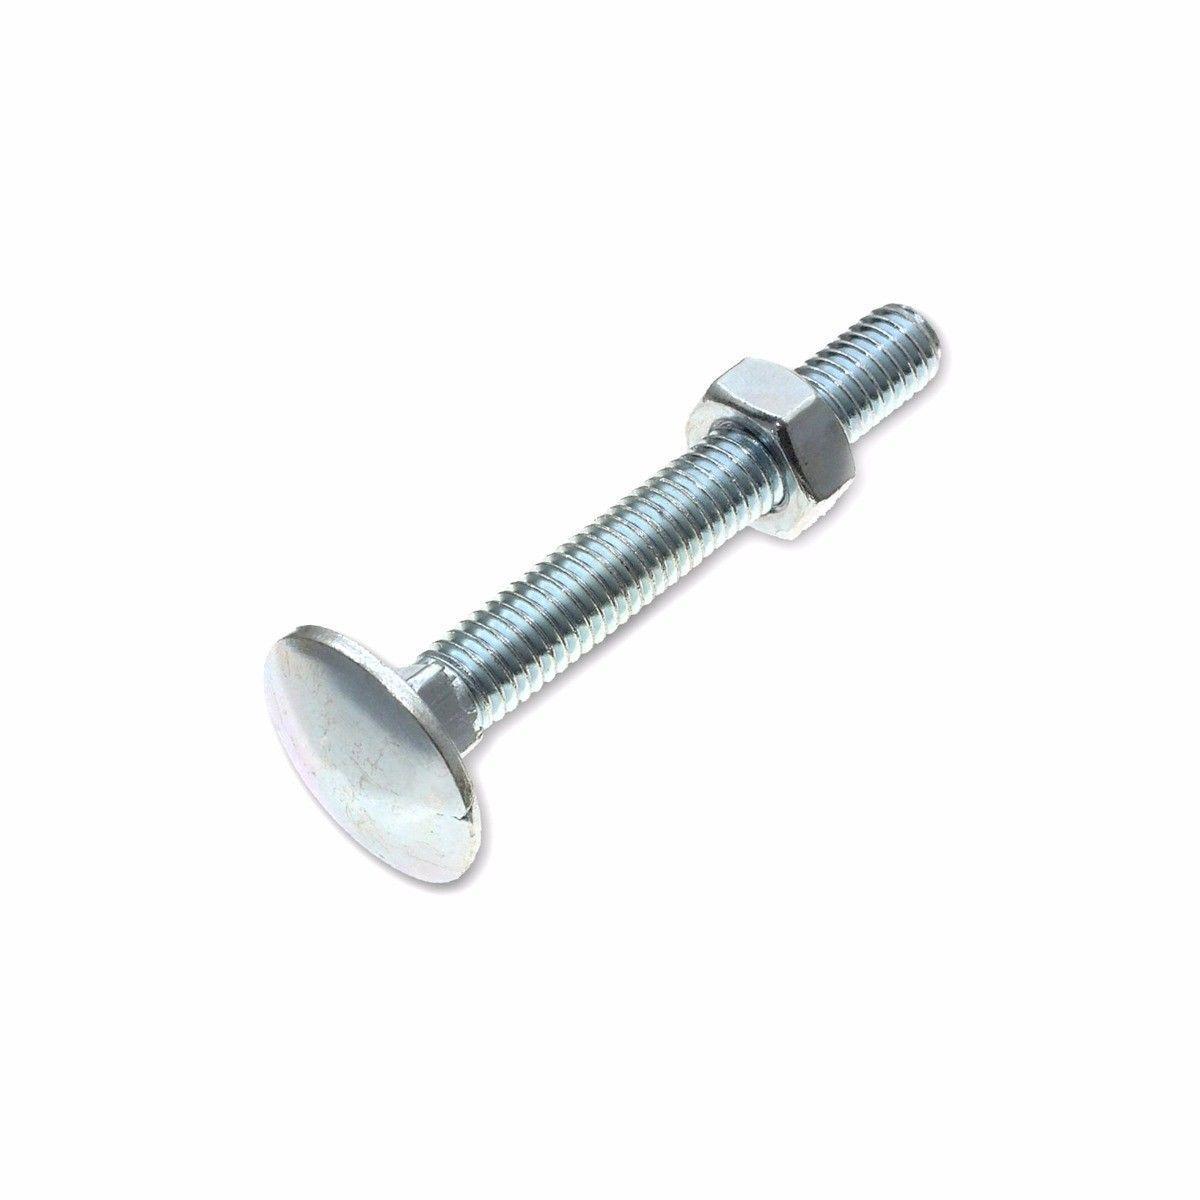 Pack Of 3 Cup Square Bolts & Nuts M8 x 100 Diy 0058 (Large Letter Rate)